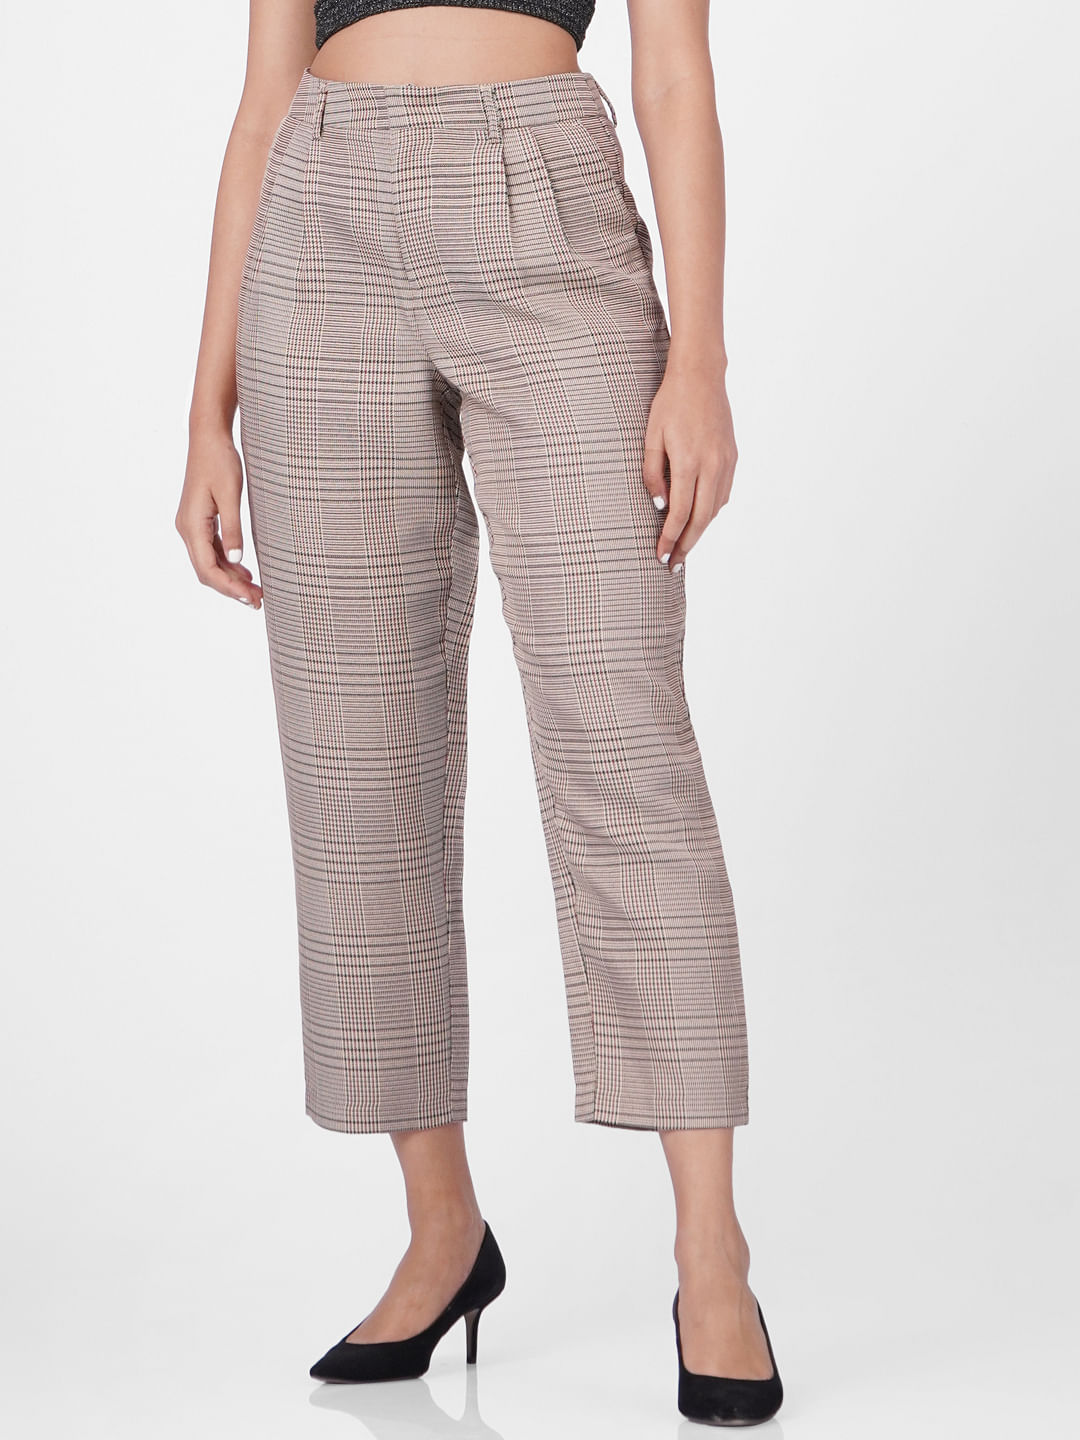 Buy HM Women Grey  Black Checked Cigarette Trousers  Trousers for Women  12154216  Myntra